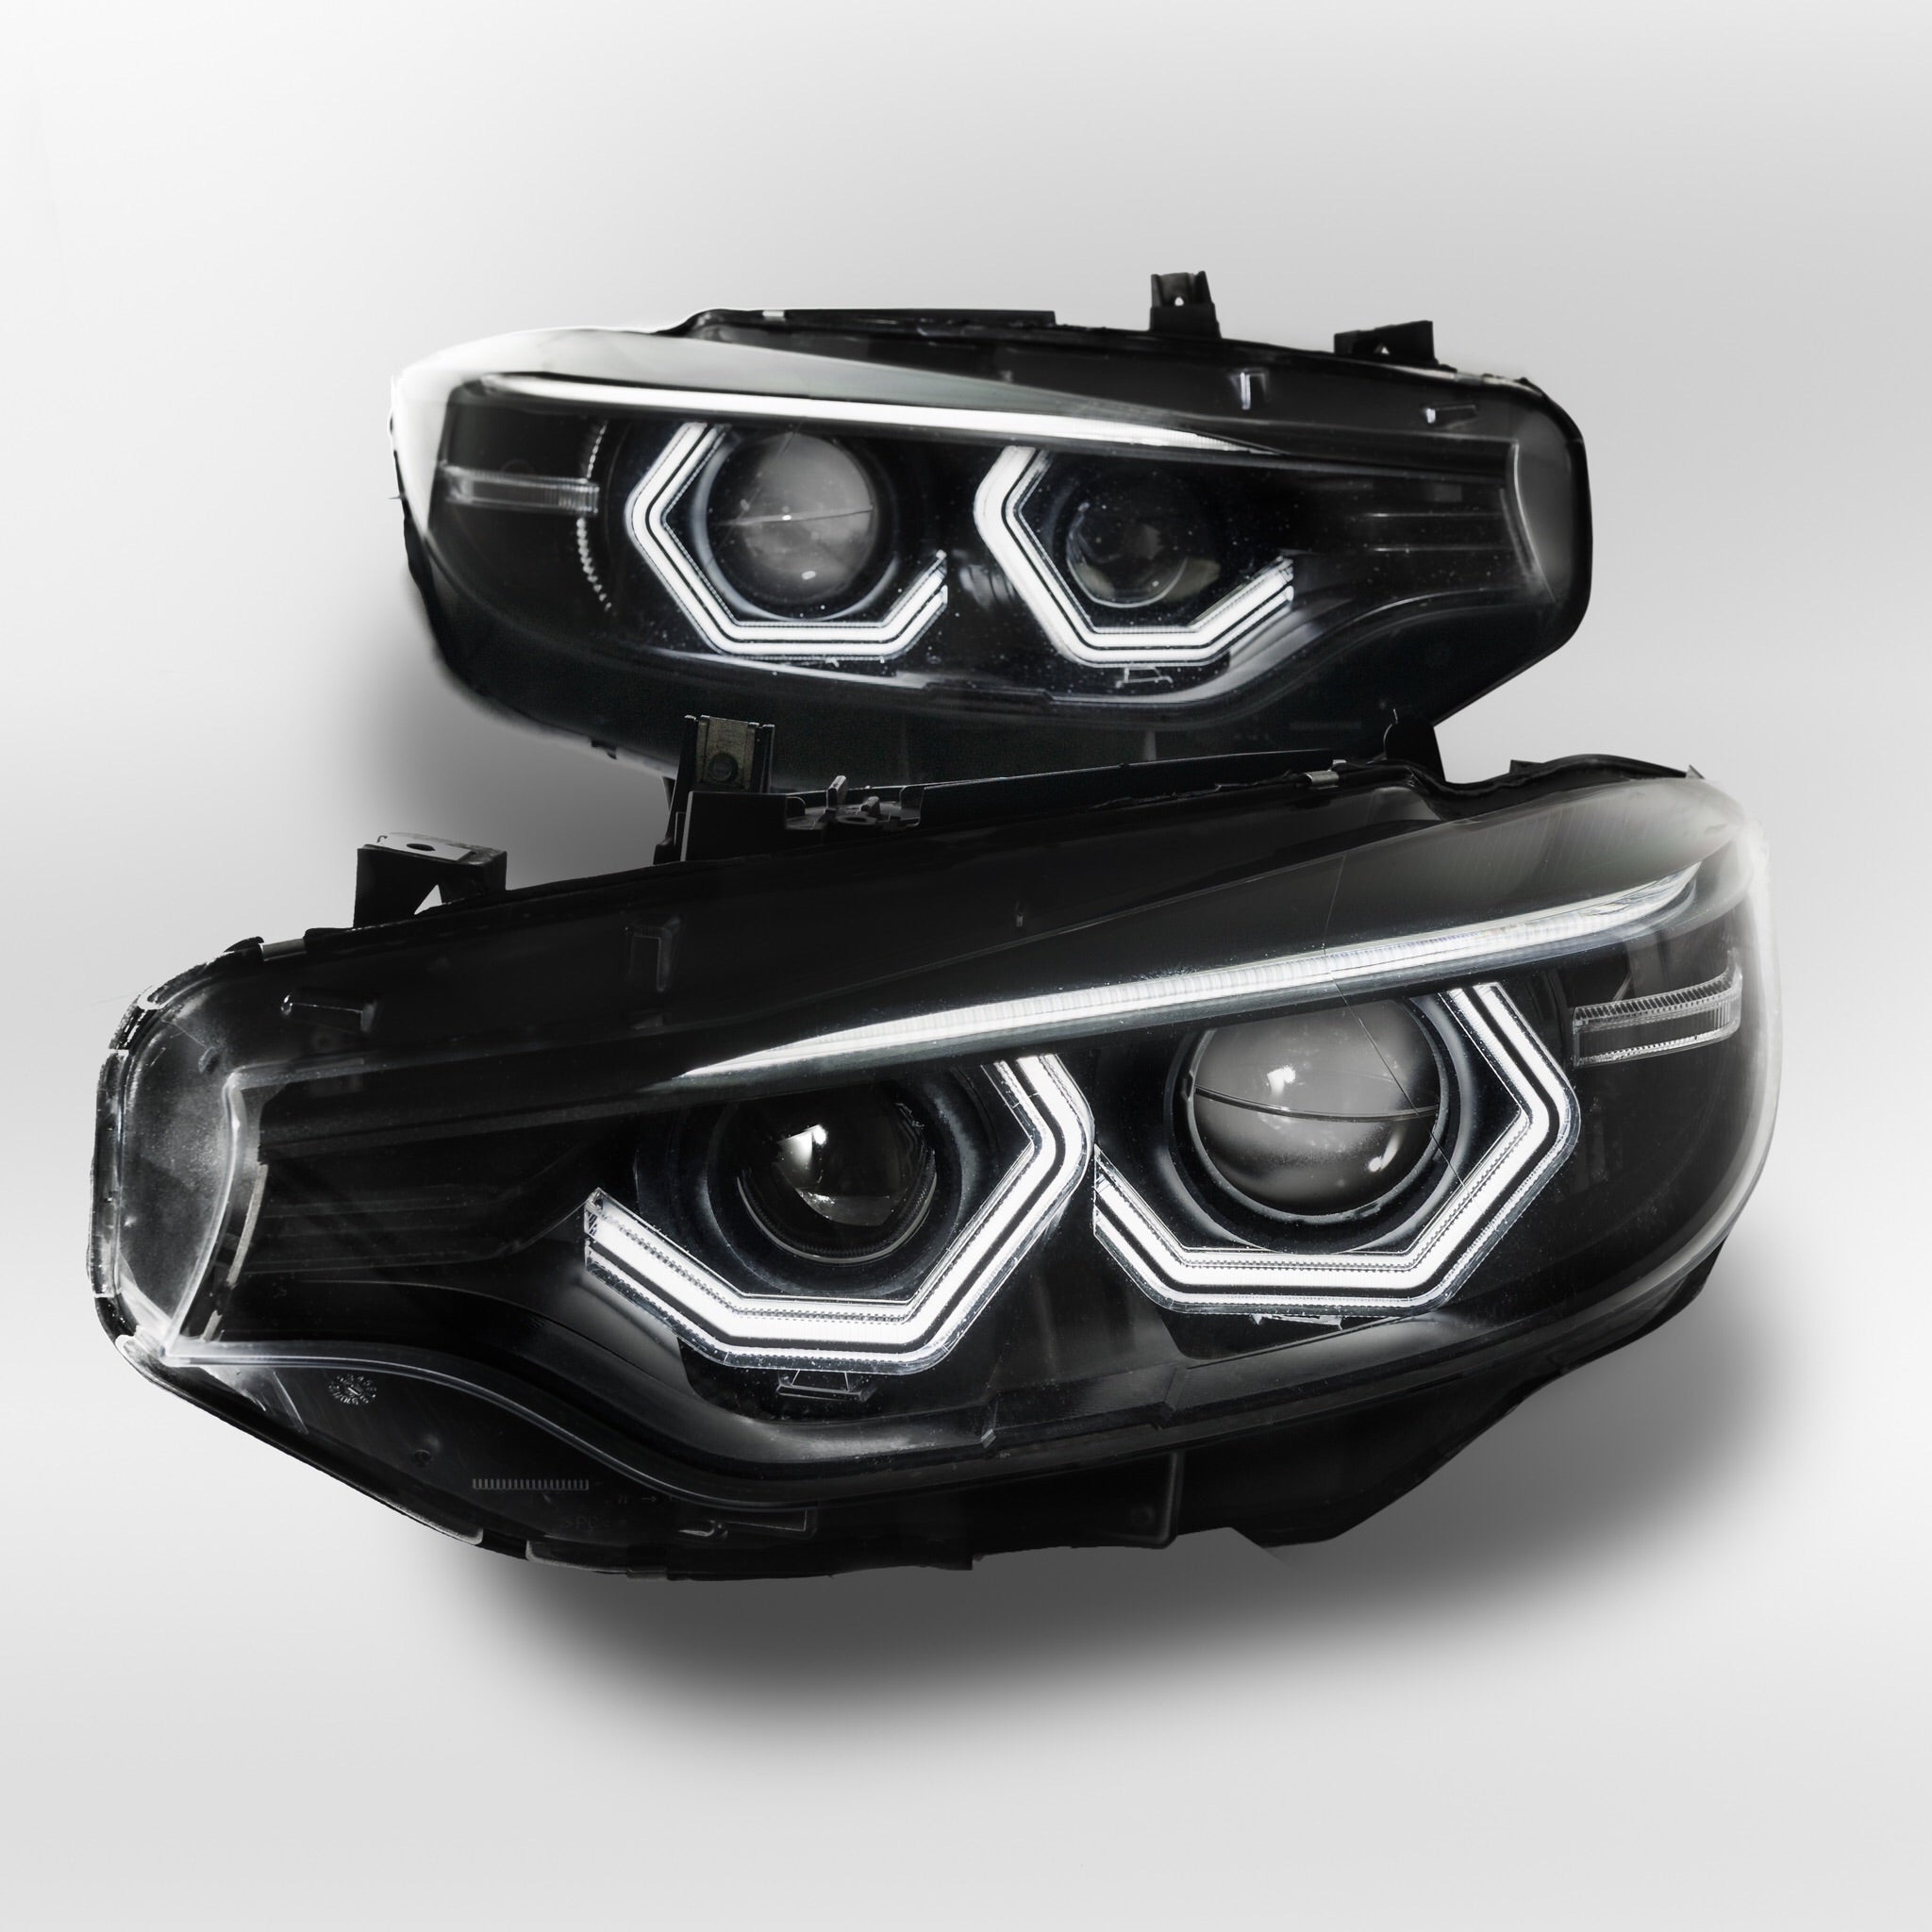 PRE-BUILT F8x M3/M4 and F32 Coupe Vision Retrofit (2015 - 2017 Xenon Headlights only)